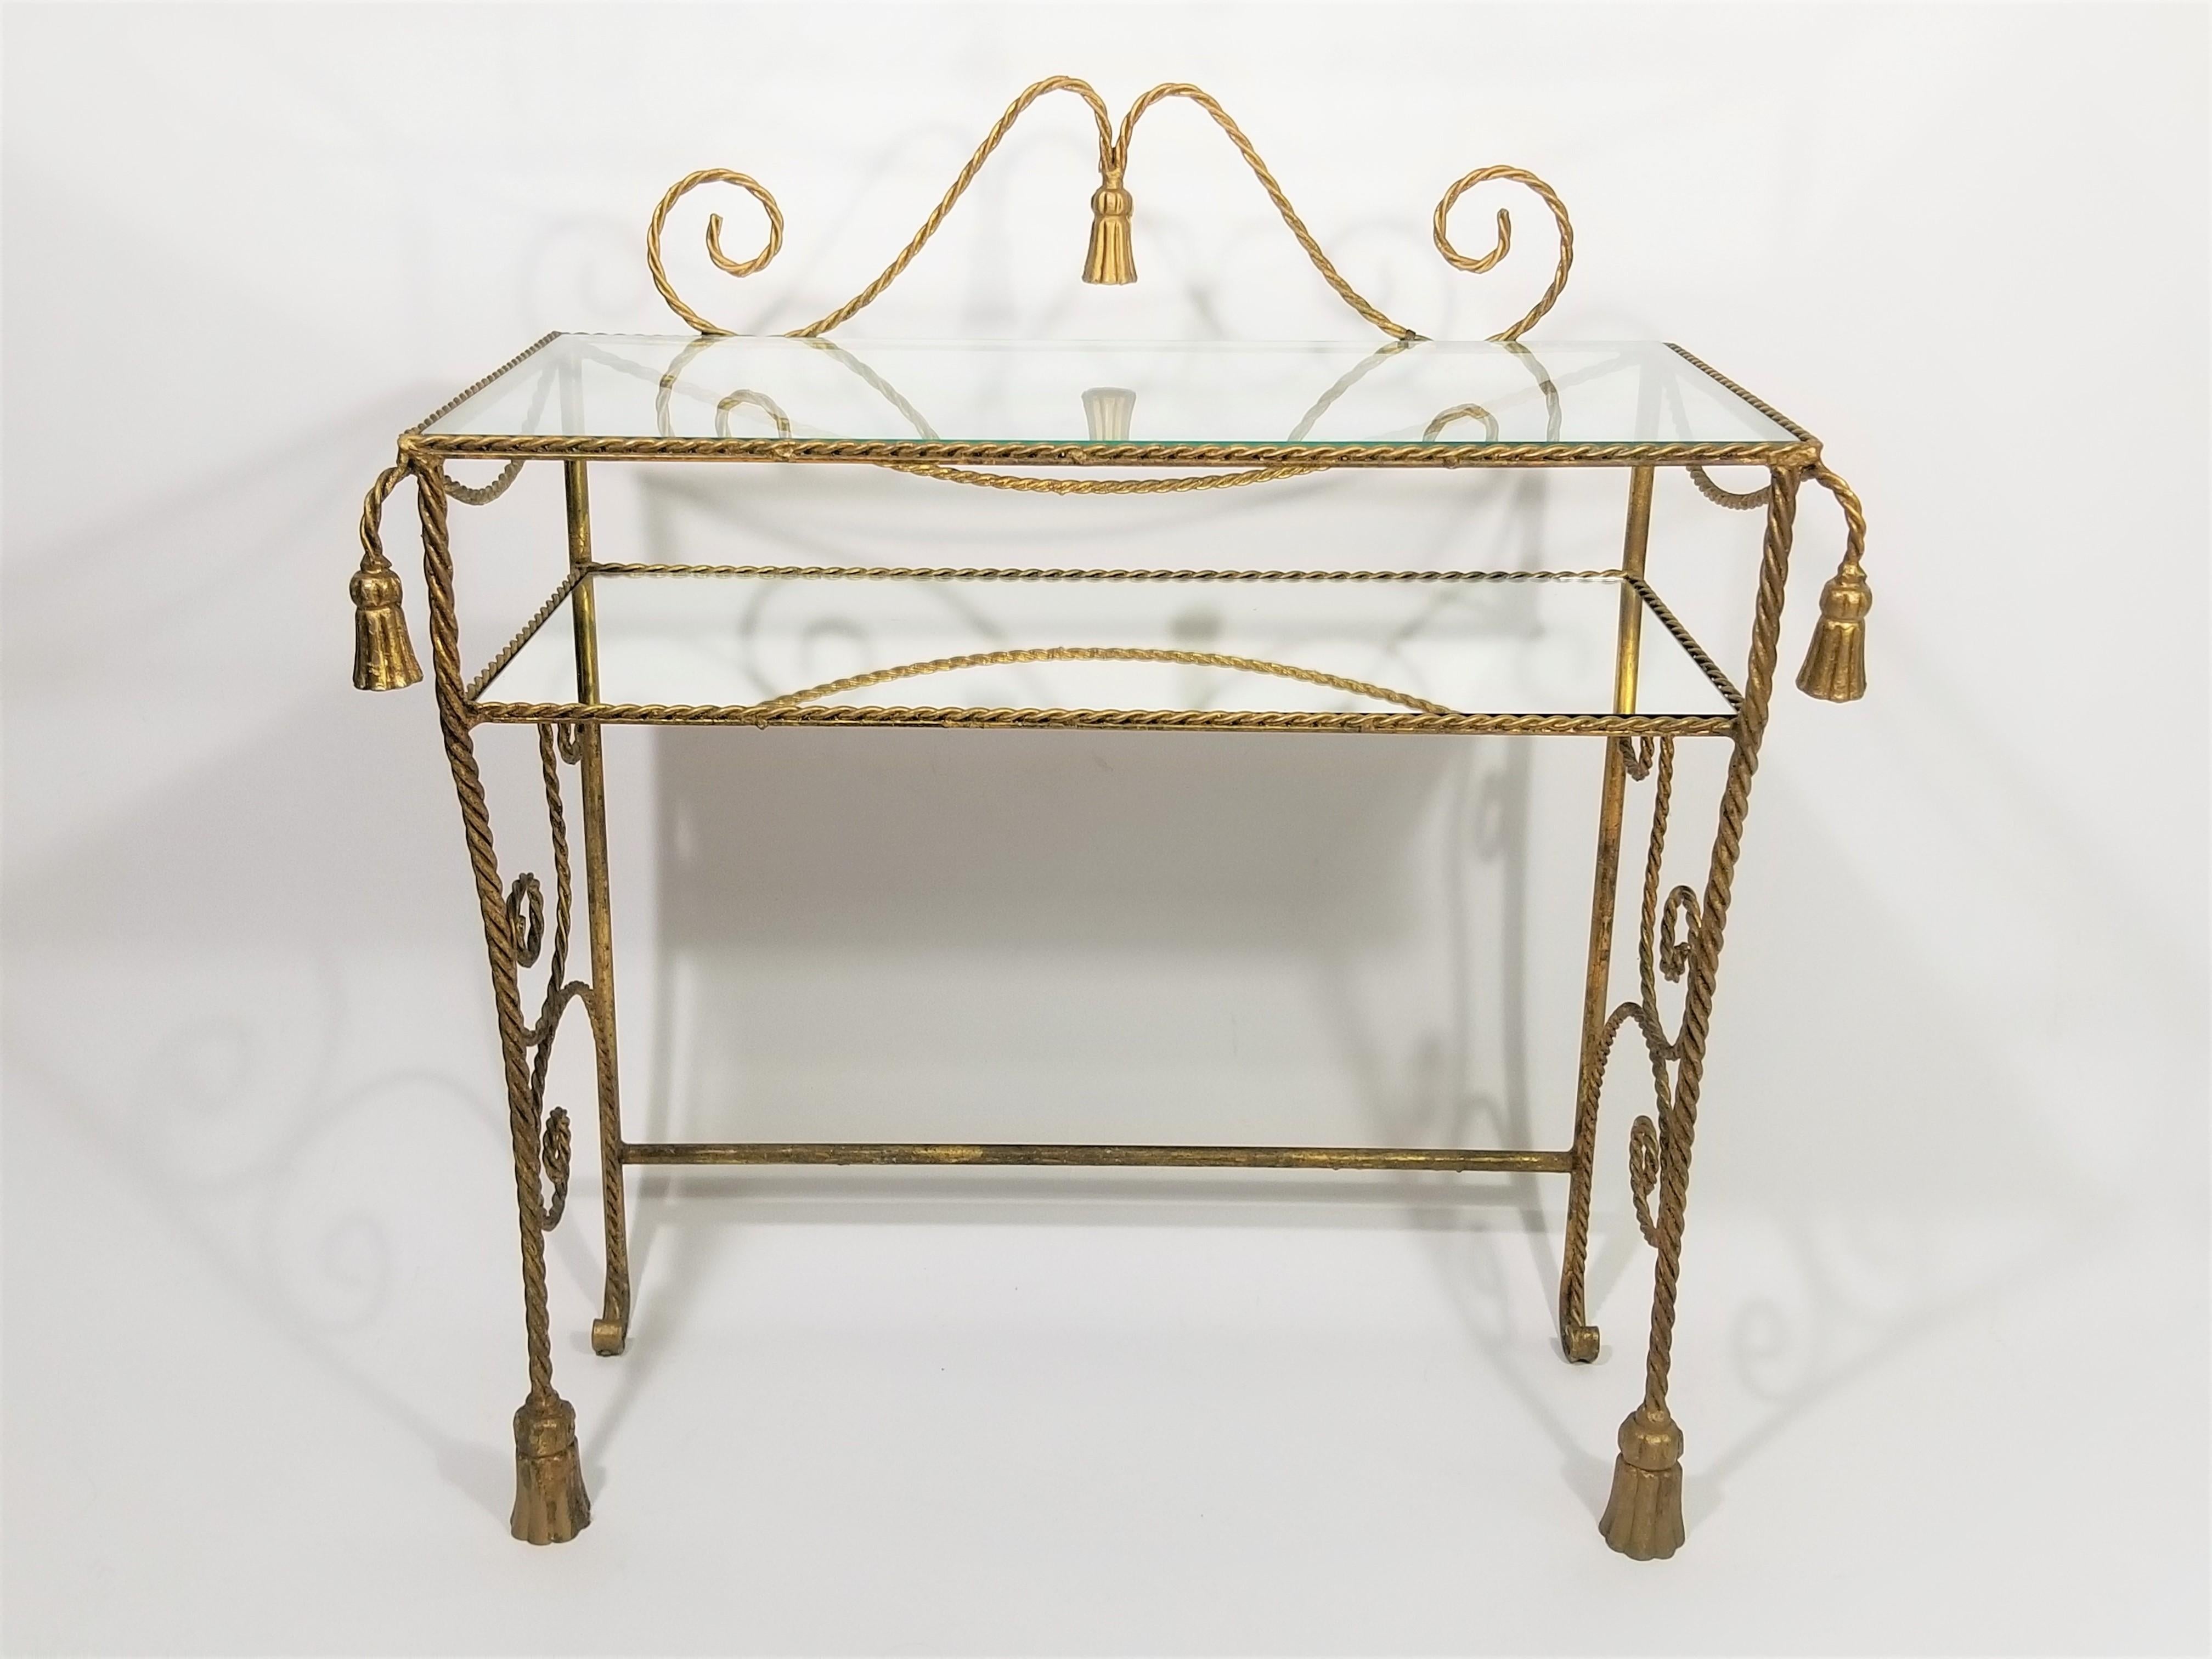 Italian Gilded Rope Tassel Glass Mirror Vanity Dressing Table Made in Italy In Excellent Condition For Sale In New York, NY